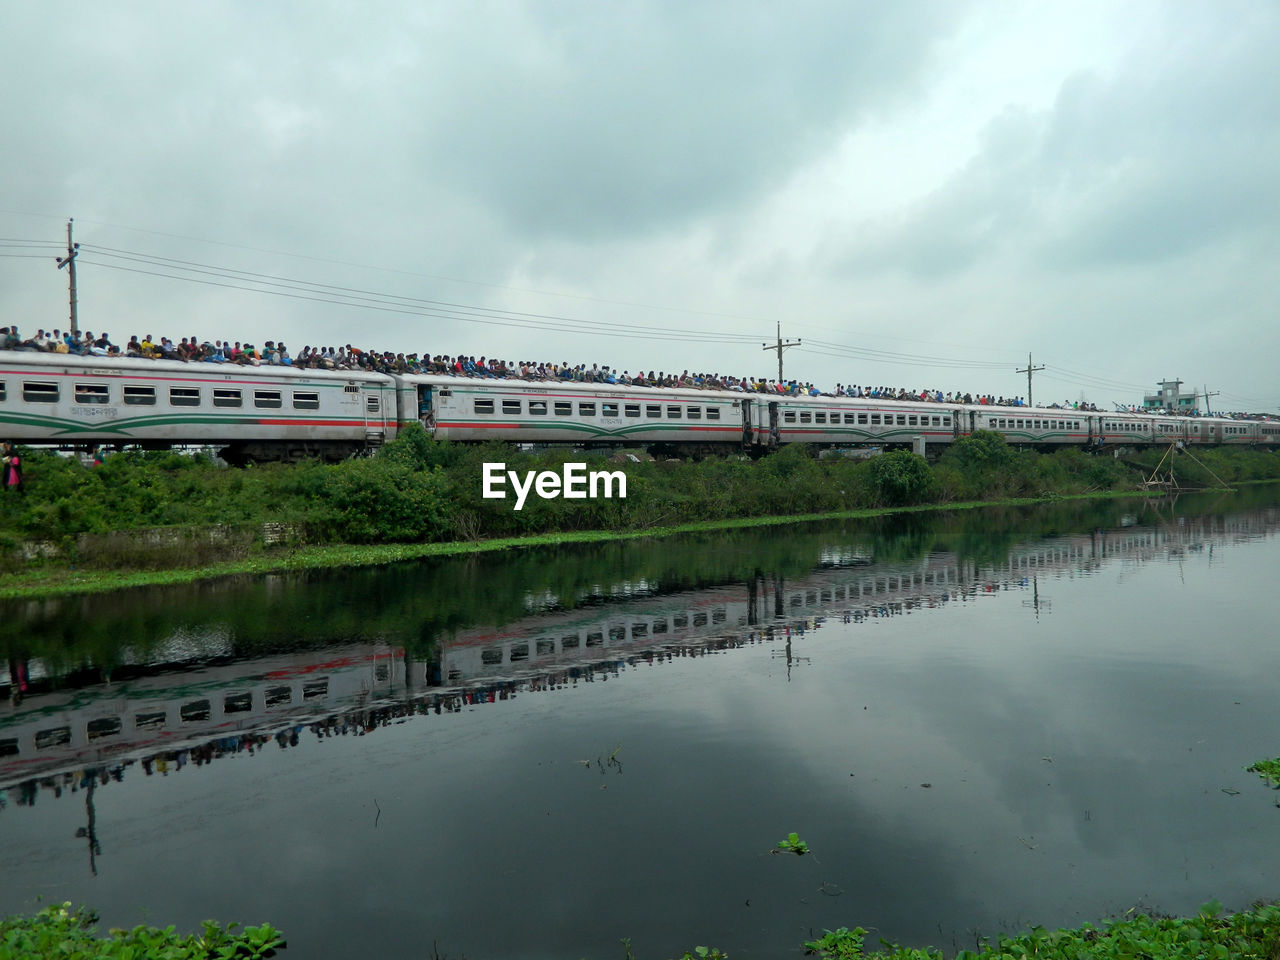 Crowd on passenger train against cloudy sky